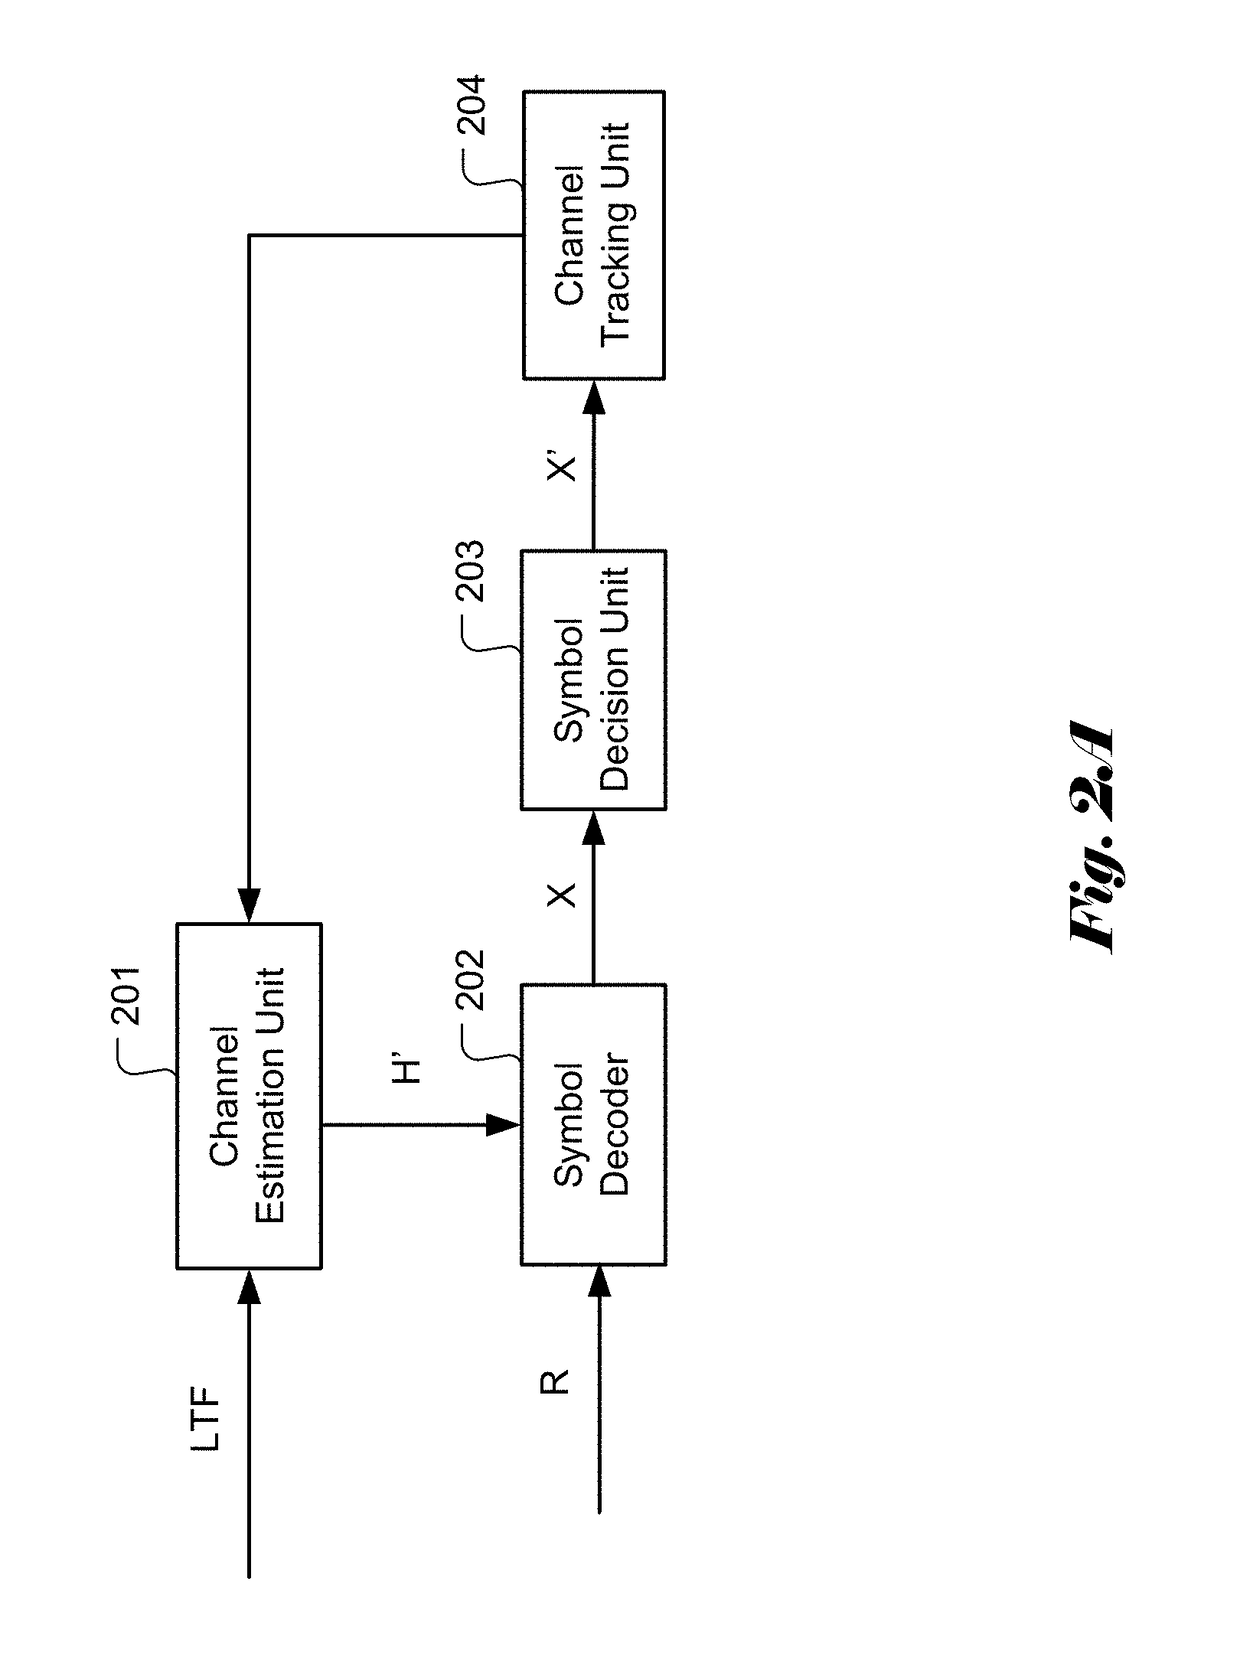 Method and Apparatus of Iterative Channel Tracking for MIMO-OFDM System